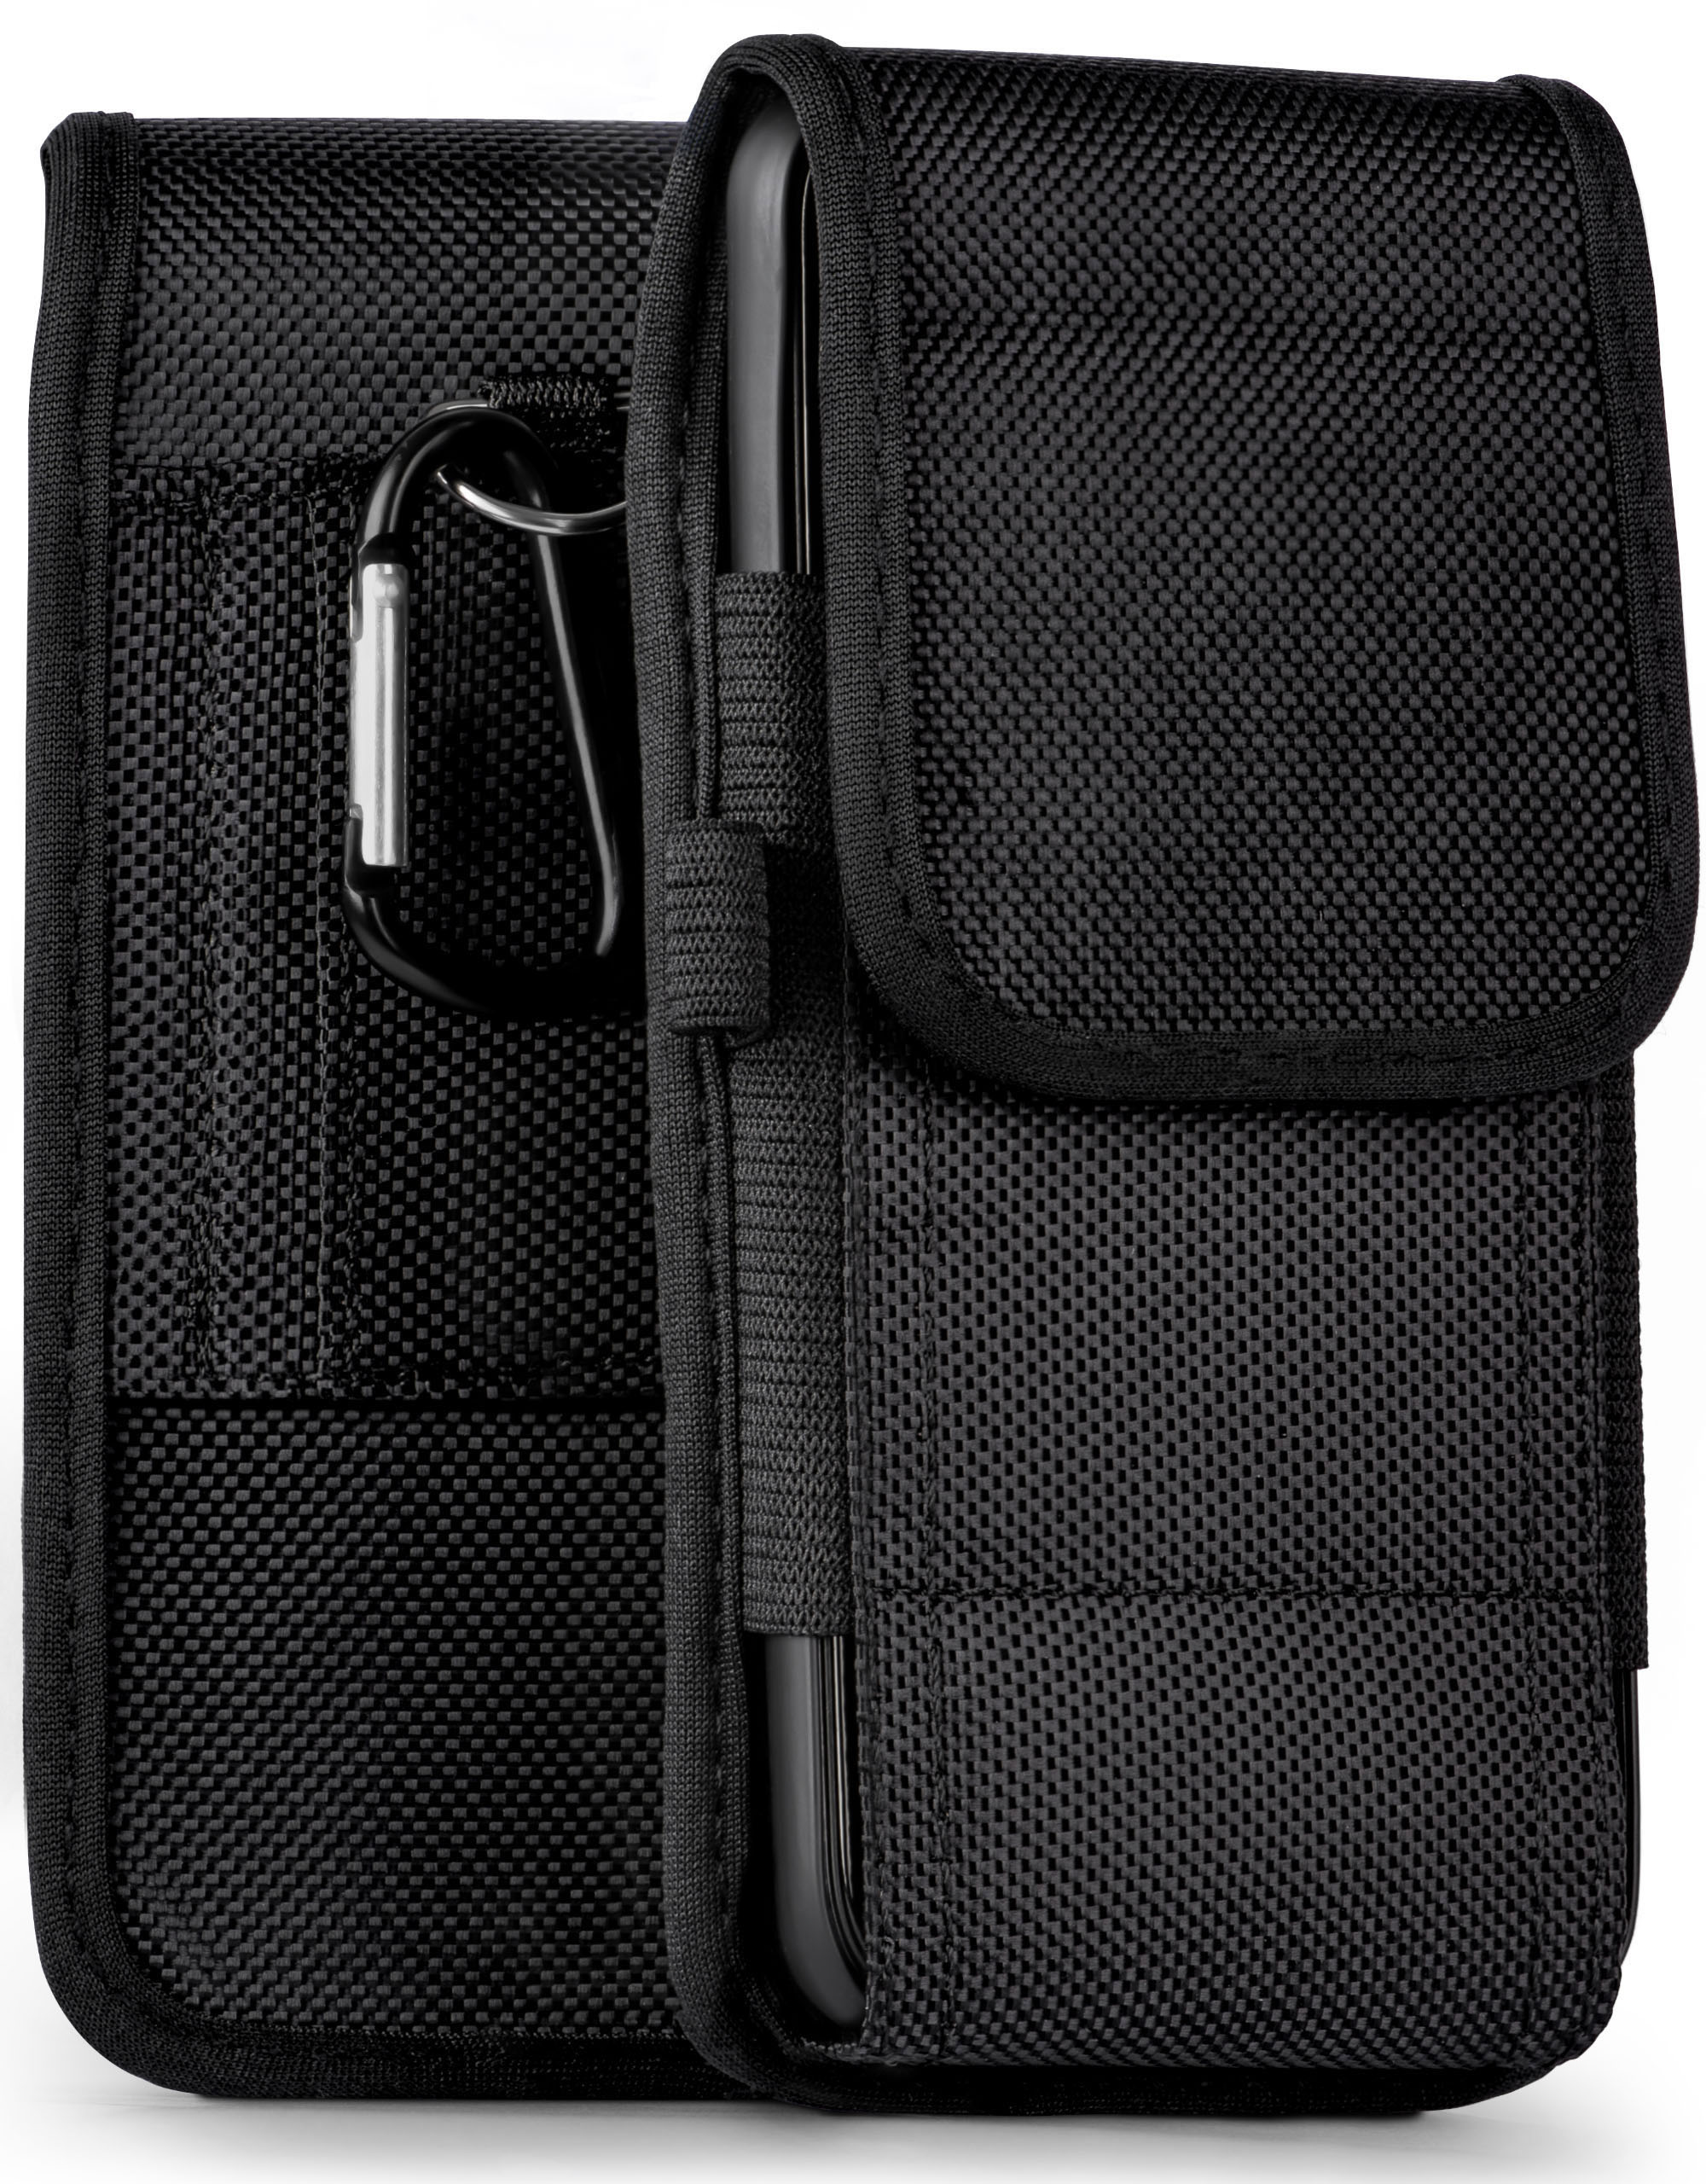 Plus, Holster, Trail Case, MOEX 7 Agility Nokia,